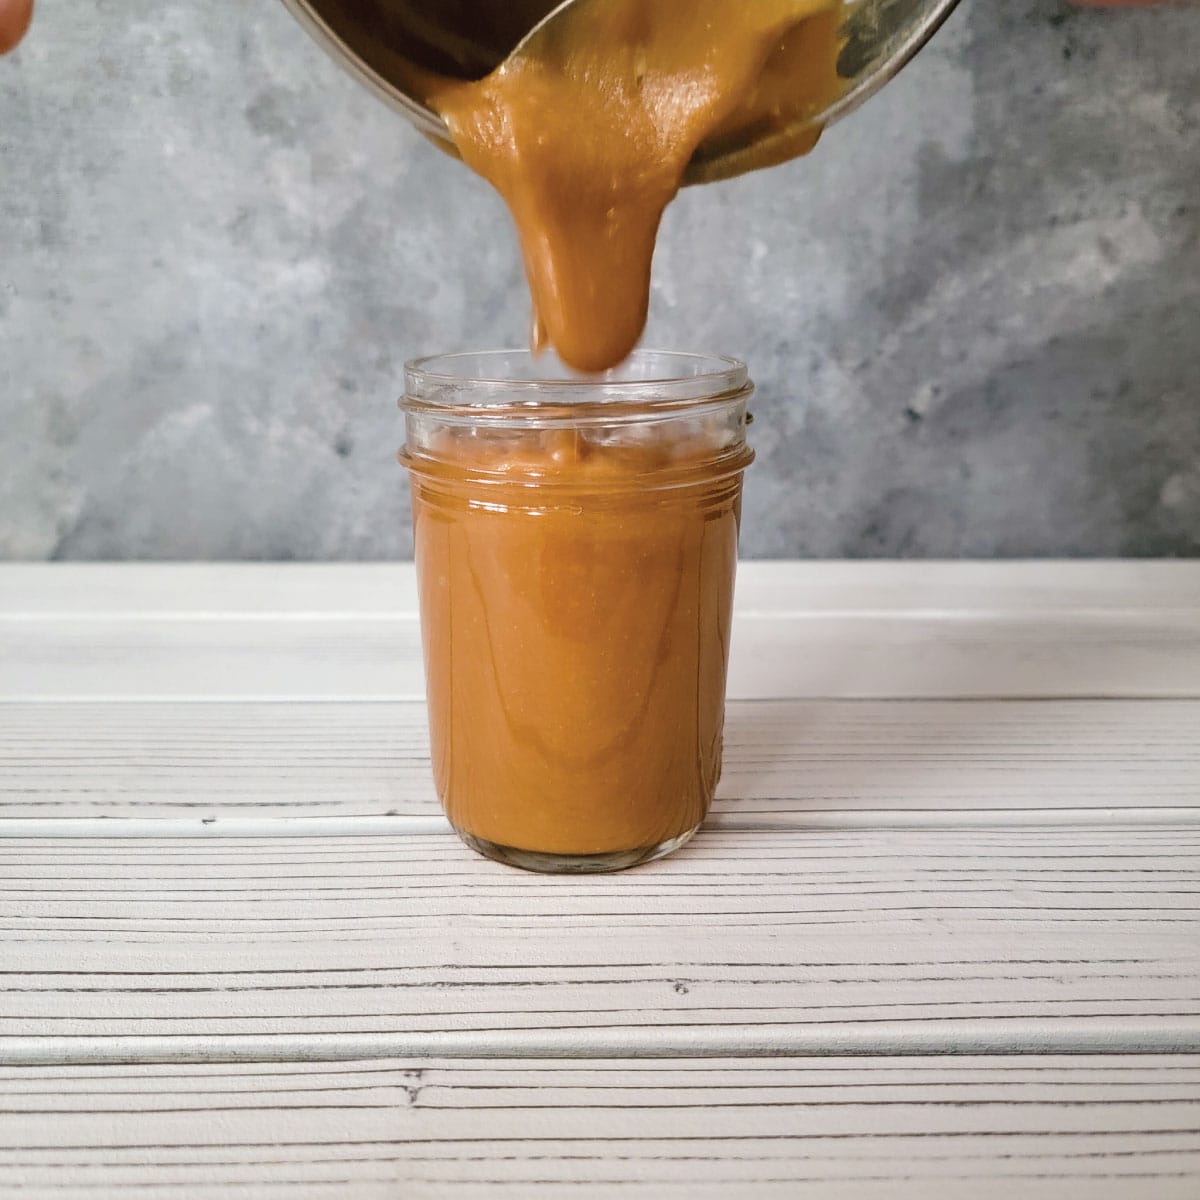 Caramel that is too thick being poured into a jar to demonstrate what is too thick.